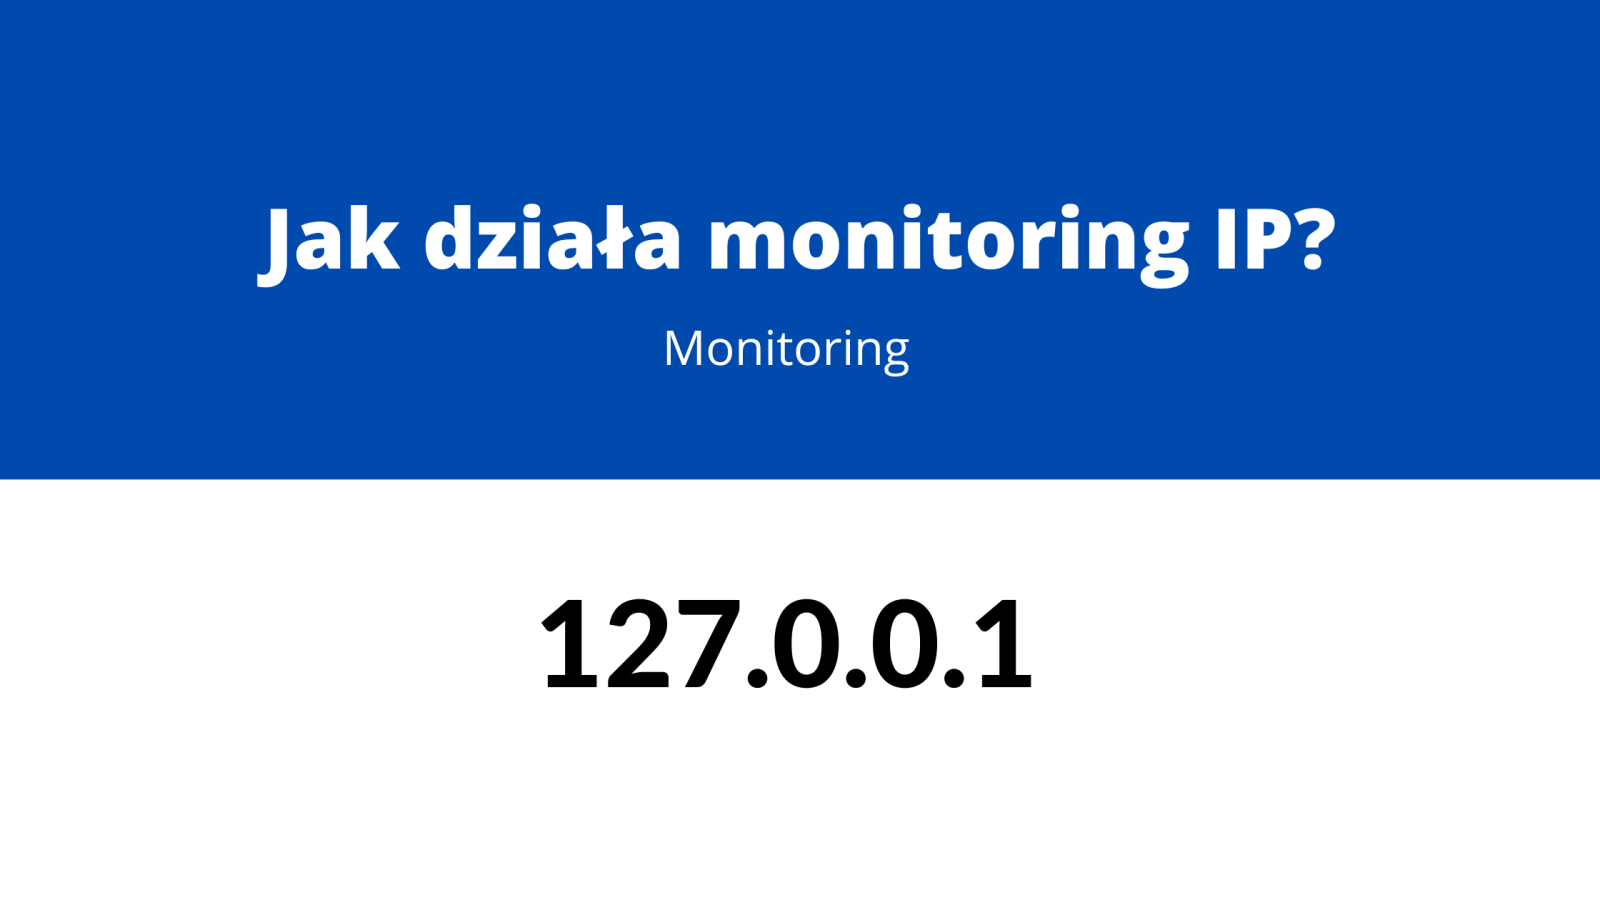 How does IP monitoring work?